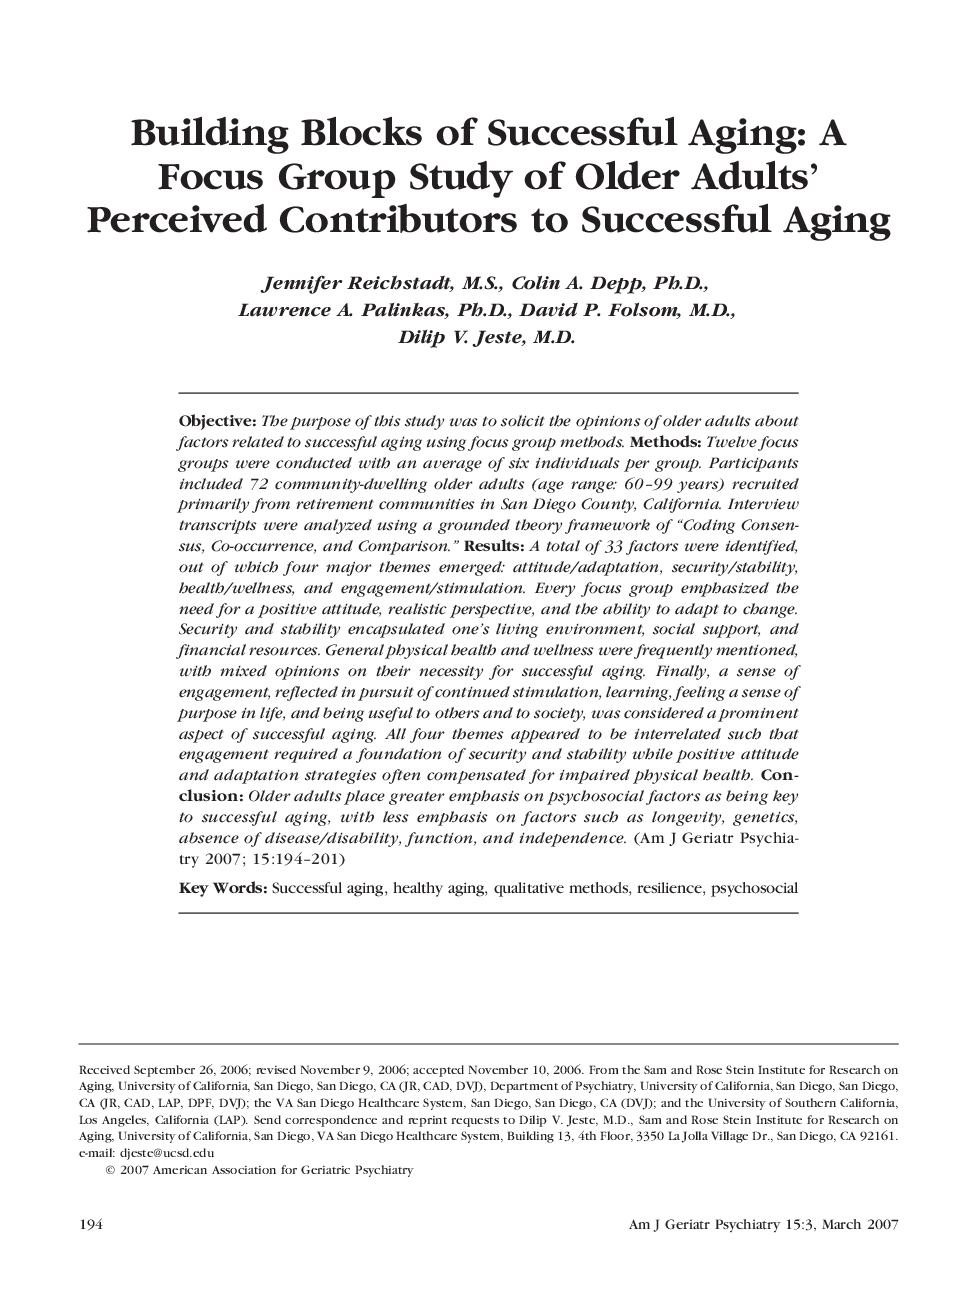 Building Blocks of Successful Aging: A Focus Group Study of Older Adults' Perceived Contributors to Successful Aging